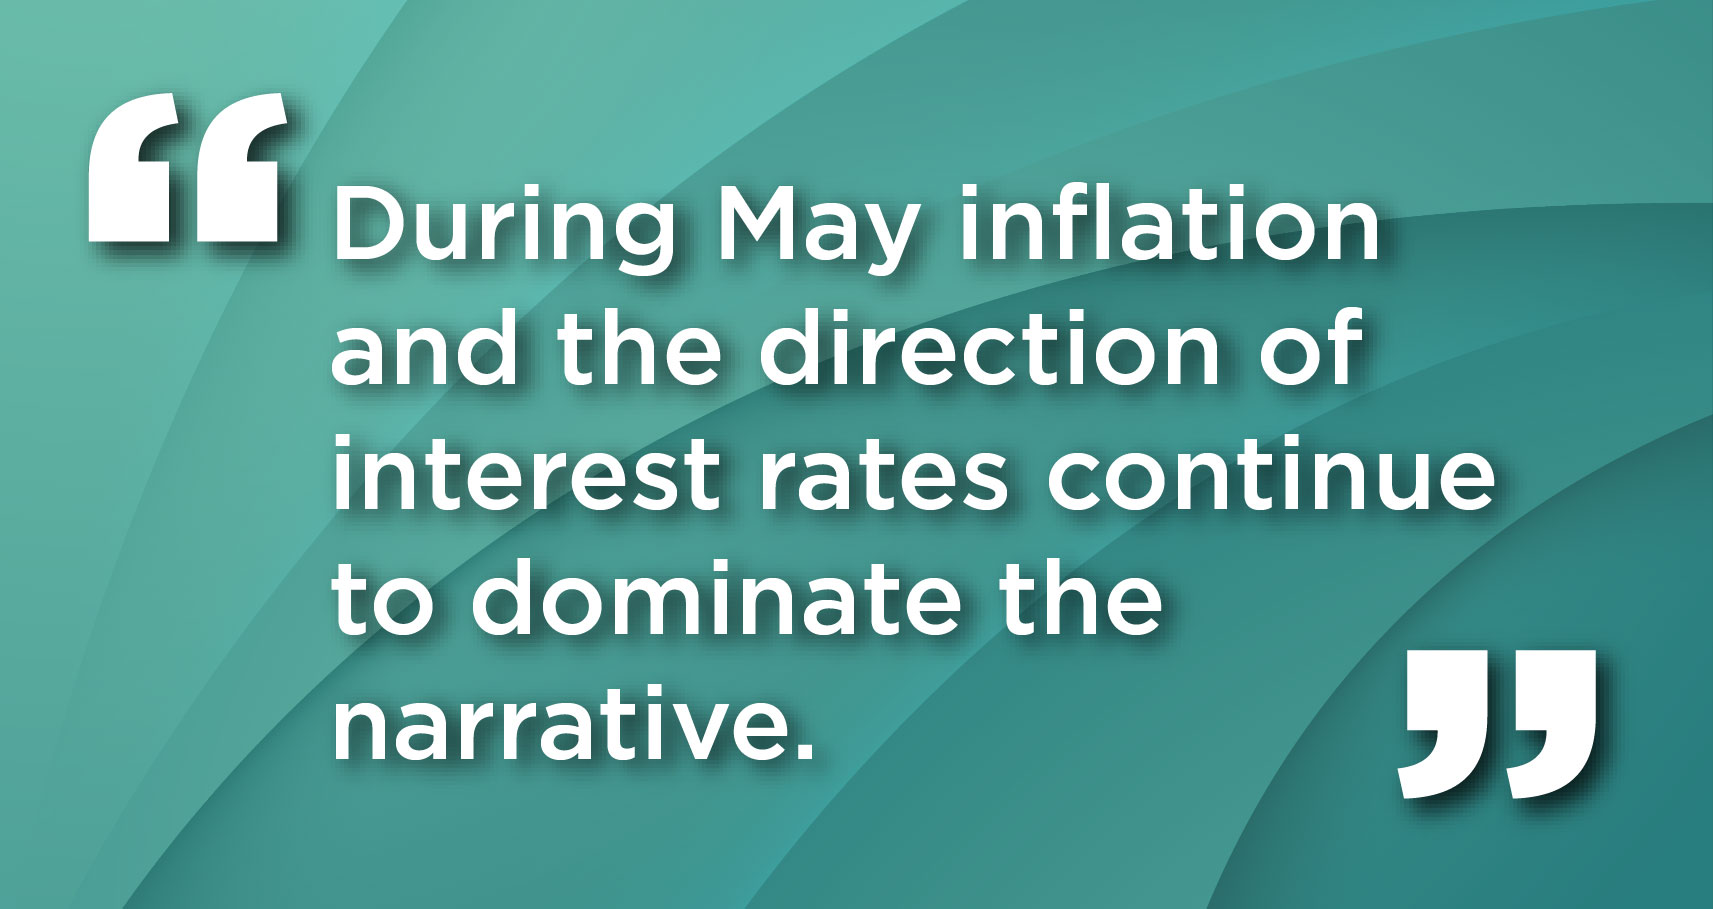 During May inflation and the direction of interest rates continue to dominate the narrative.